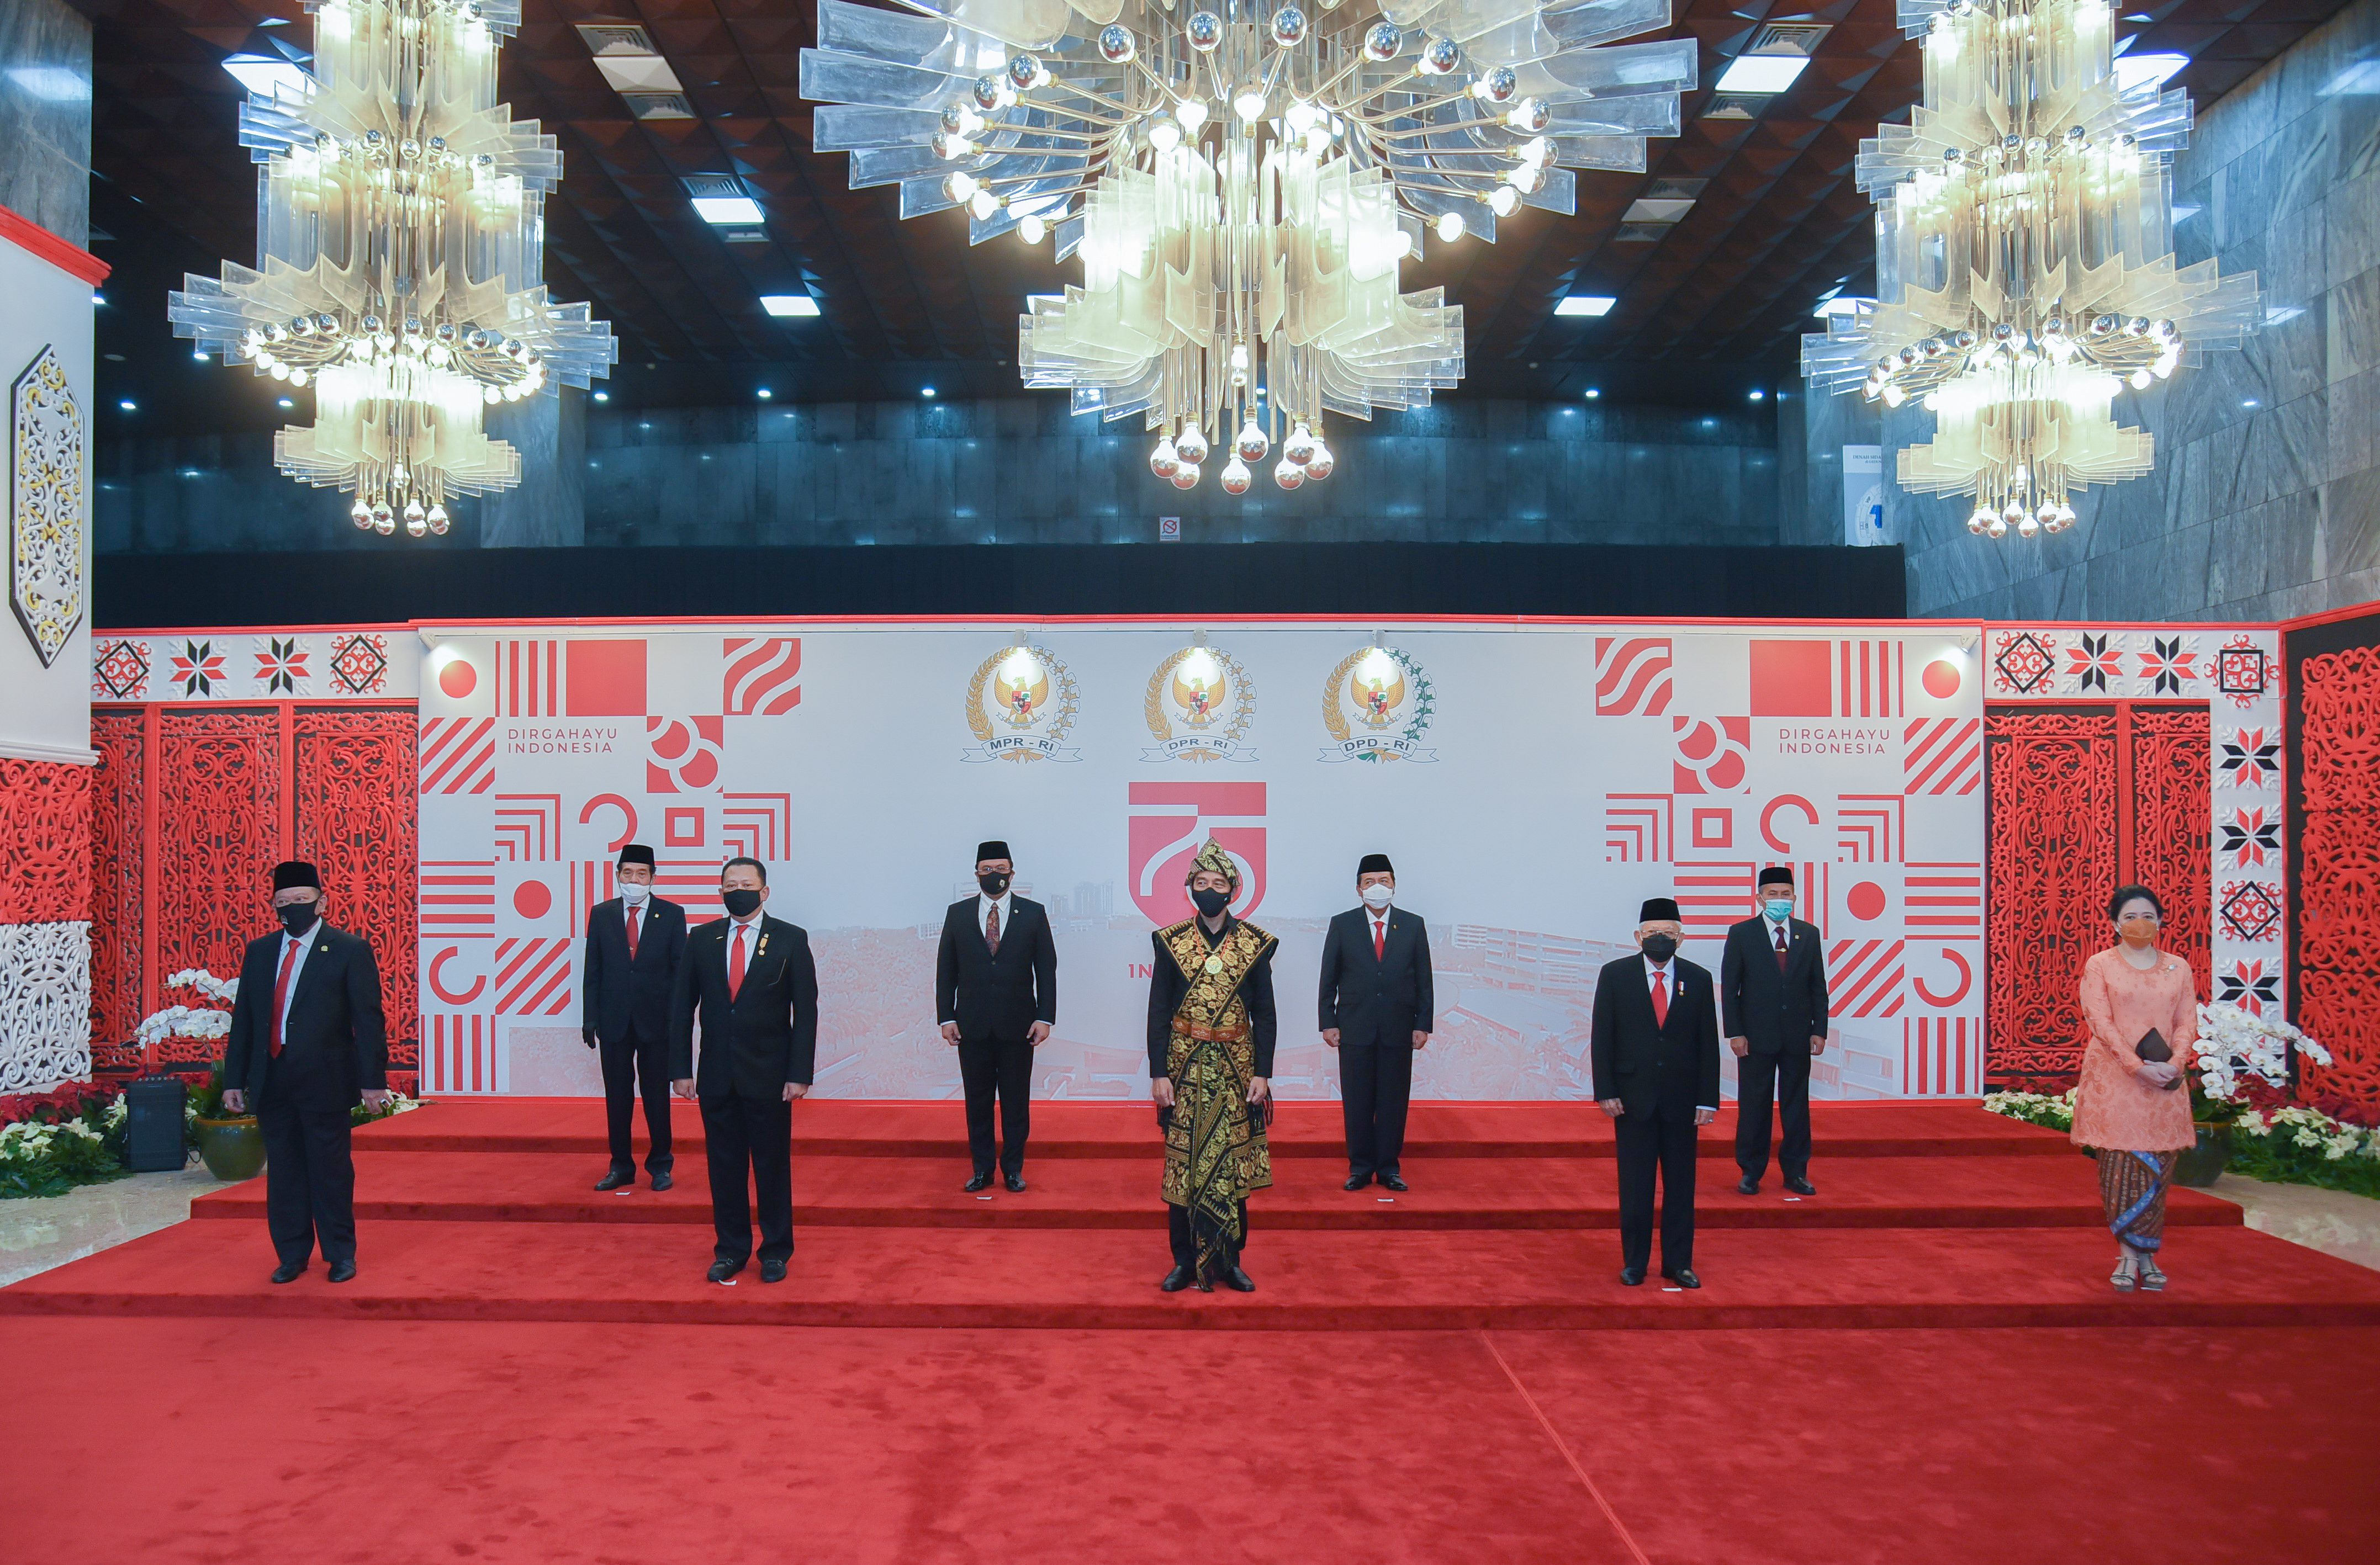 CHIEF JUSTICE SYARIFUDDIN ATTENDS ANNUAL SESSION OF MPRI RI, DPR RI, DPD RI, AND STATE ADDRESS OF THE PRESIDENT OF THE REPUBLIC OF INDONESIA AND FINANCIAL NOTE OF STATE BUDGET FOR THE 2021 FISCAL YEAR